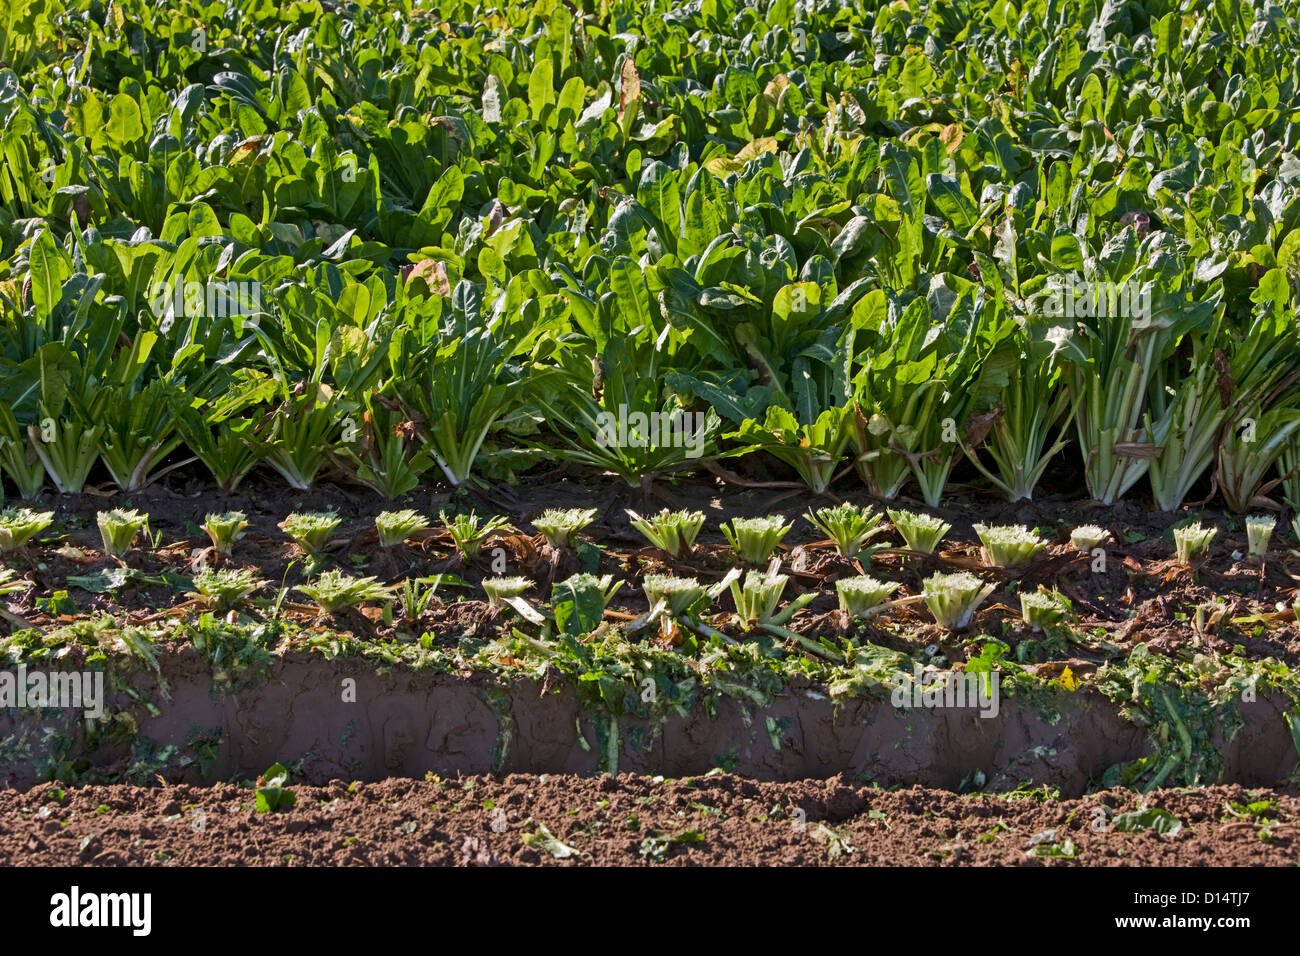 Field with rows of cultivated chicory plants for food consumption Stock Photo